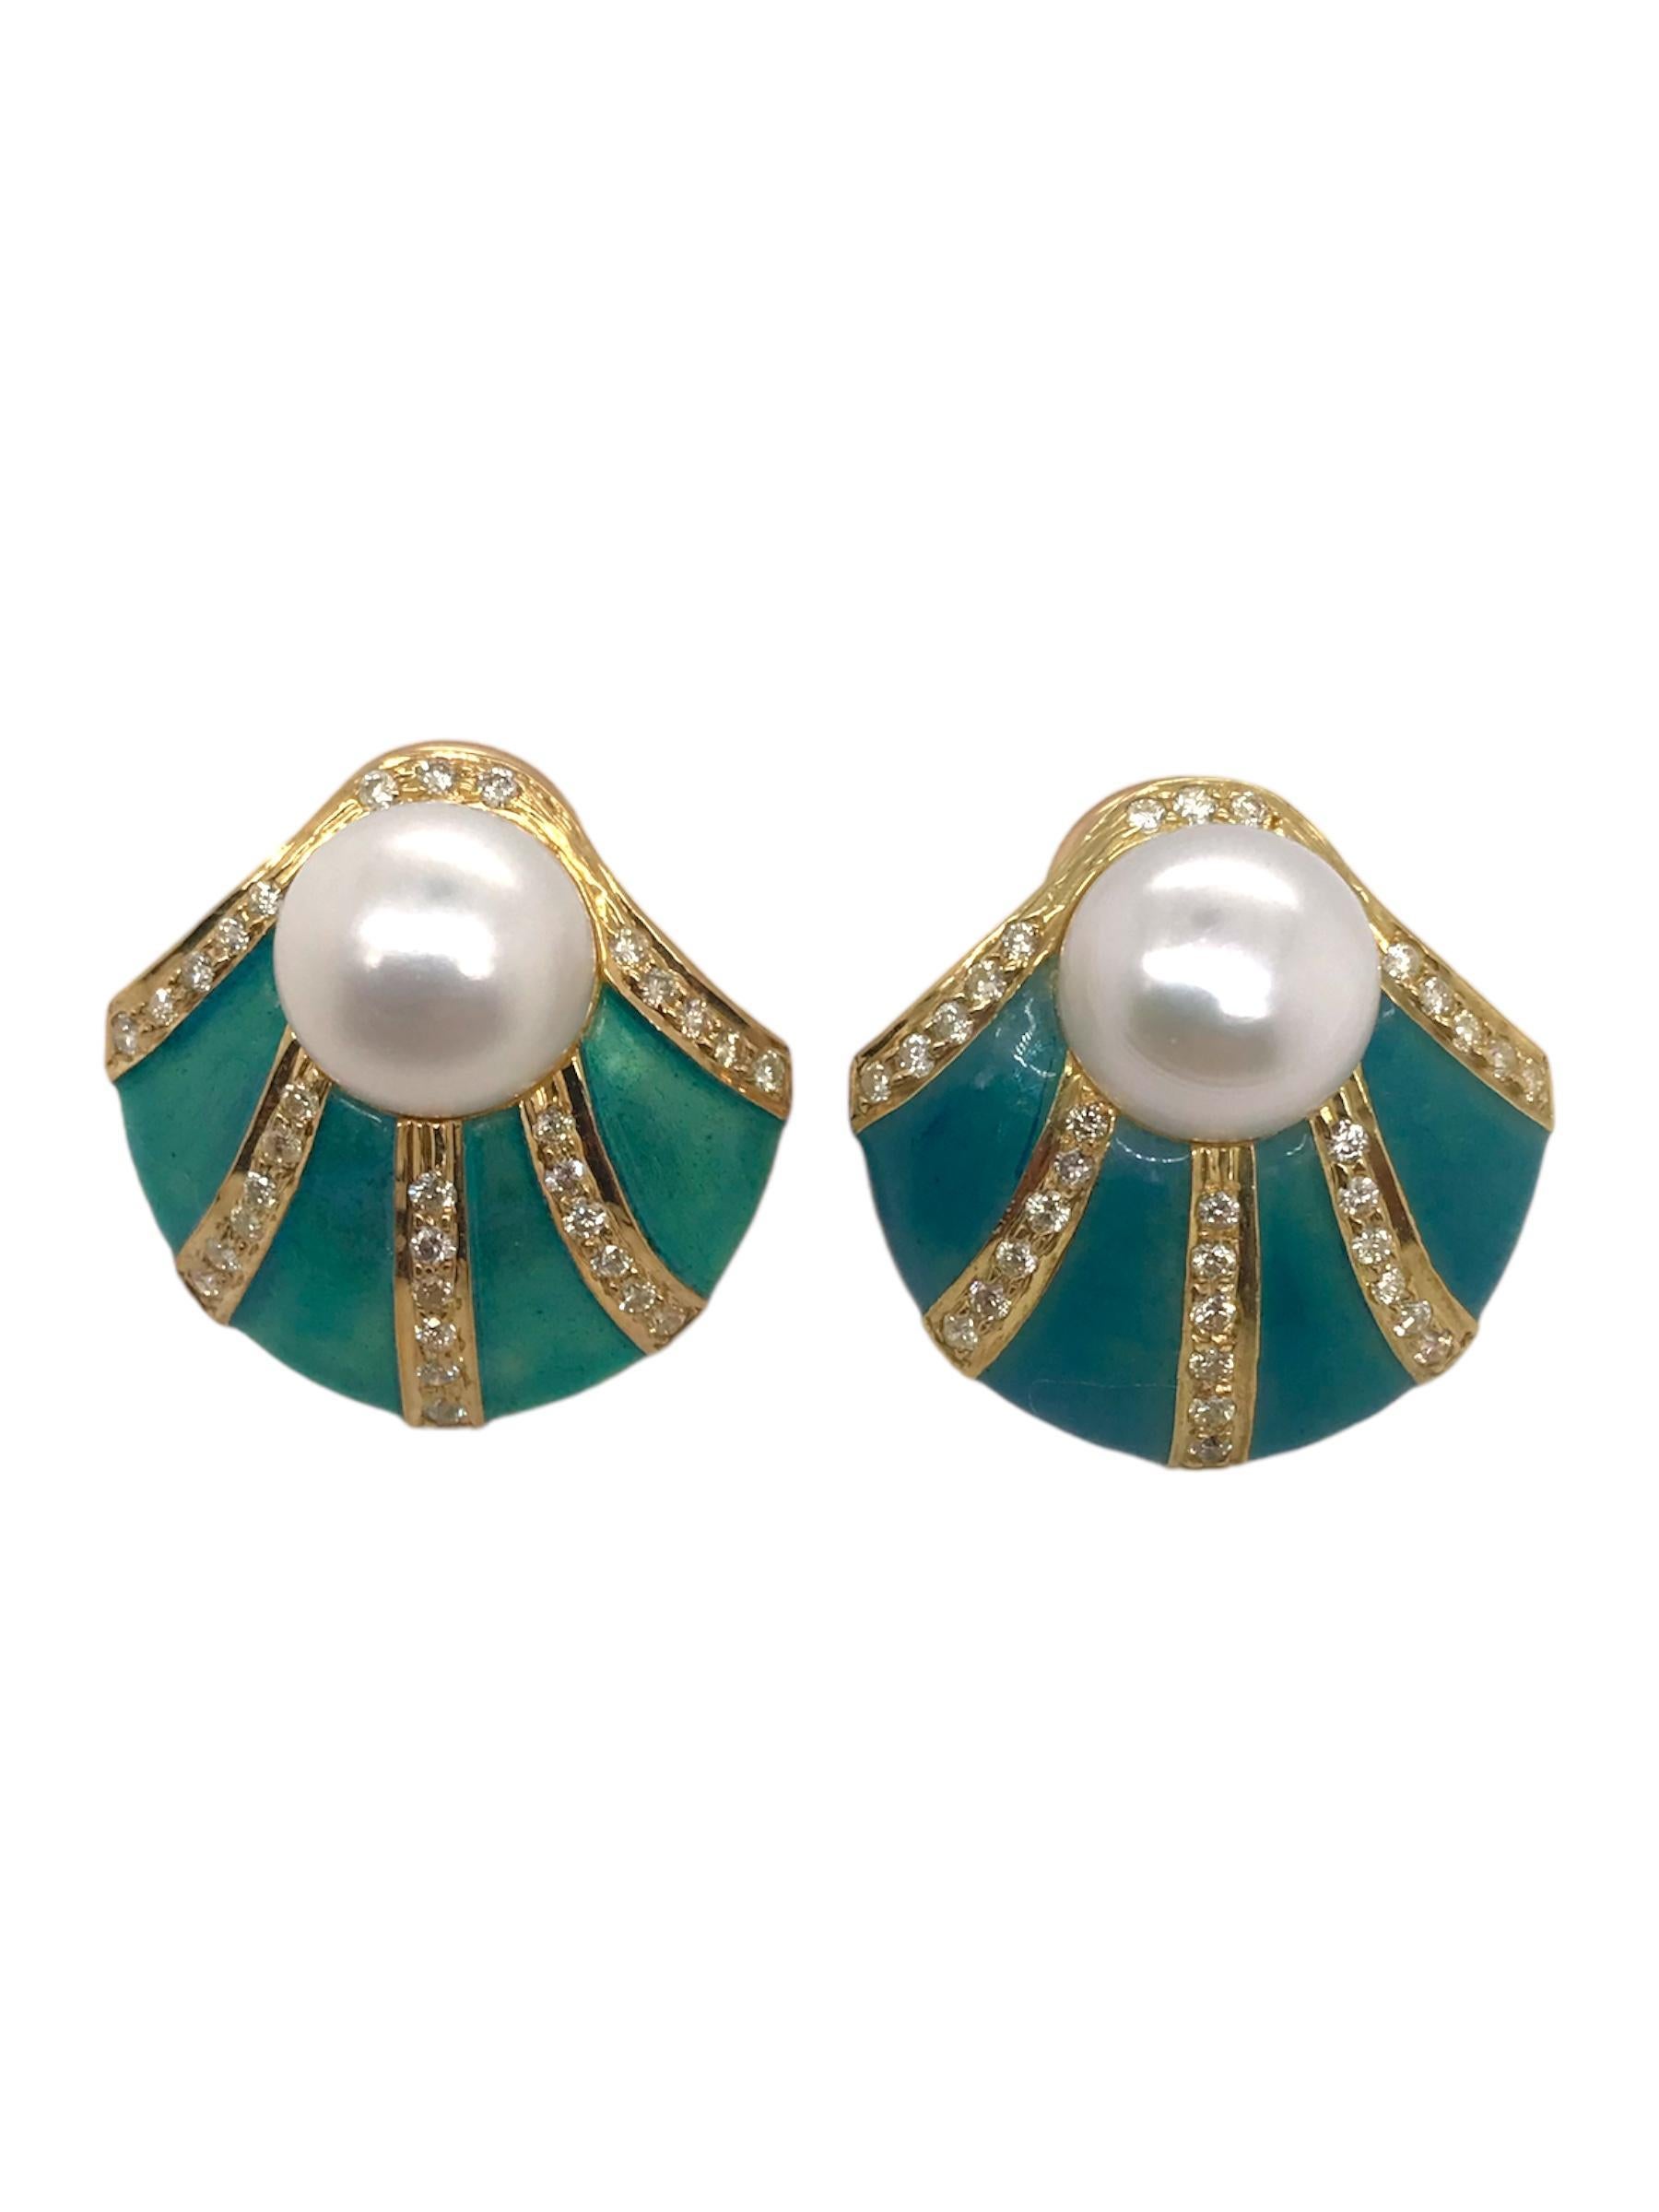 We are in awe over these earrings!
The enamel has such unique coloring and is extremely well done.
The diamonds add a great touch to complete the vision of the shell design.

Item Details
Material: 18K Yellow Gold
Height: 7/8 Inch
Width: 1